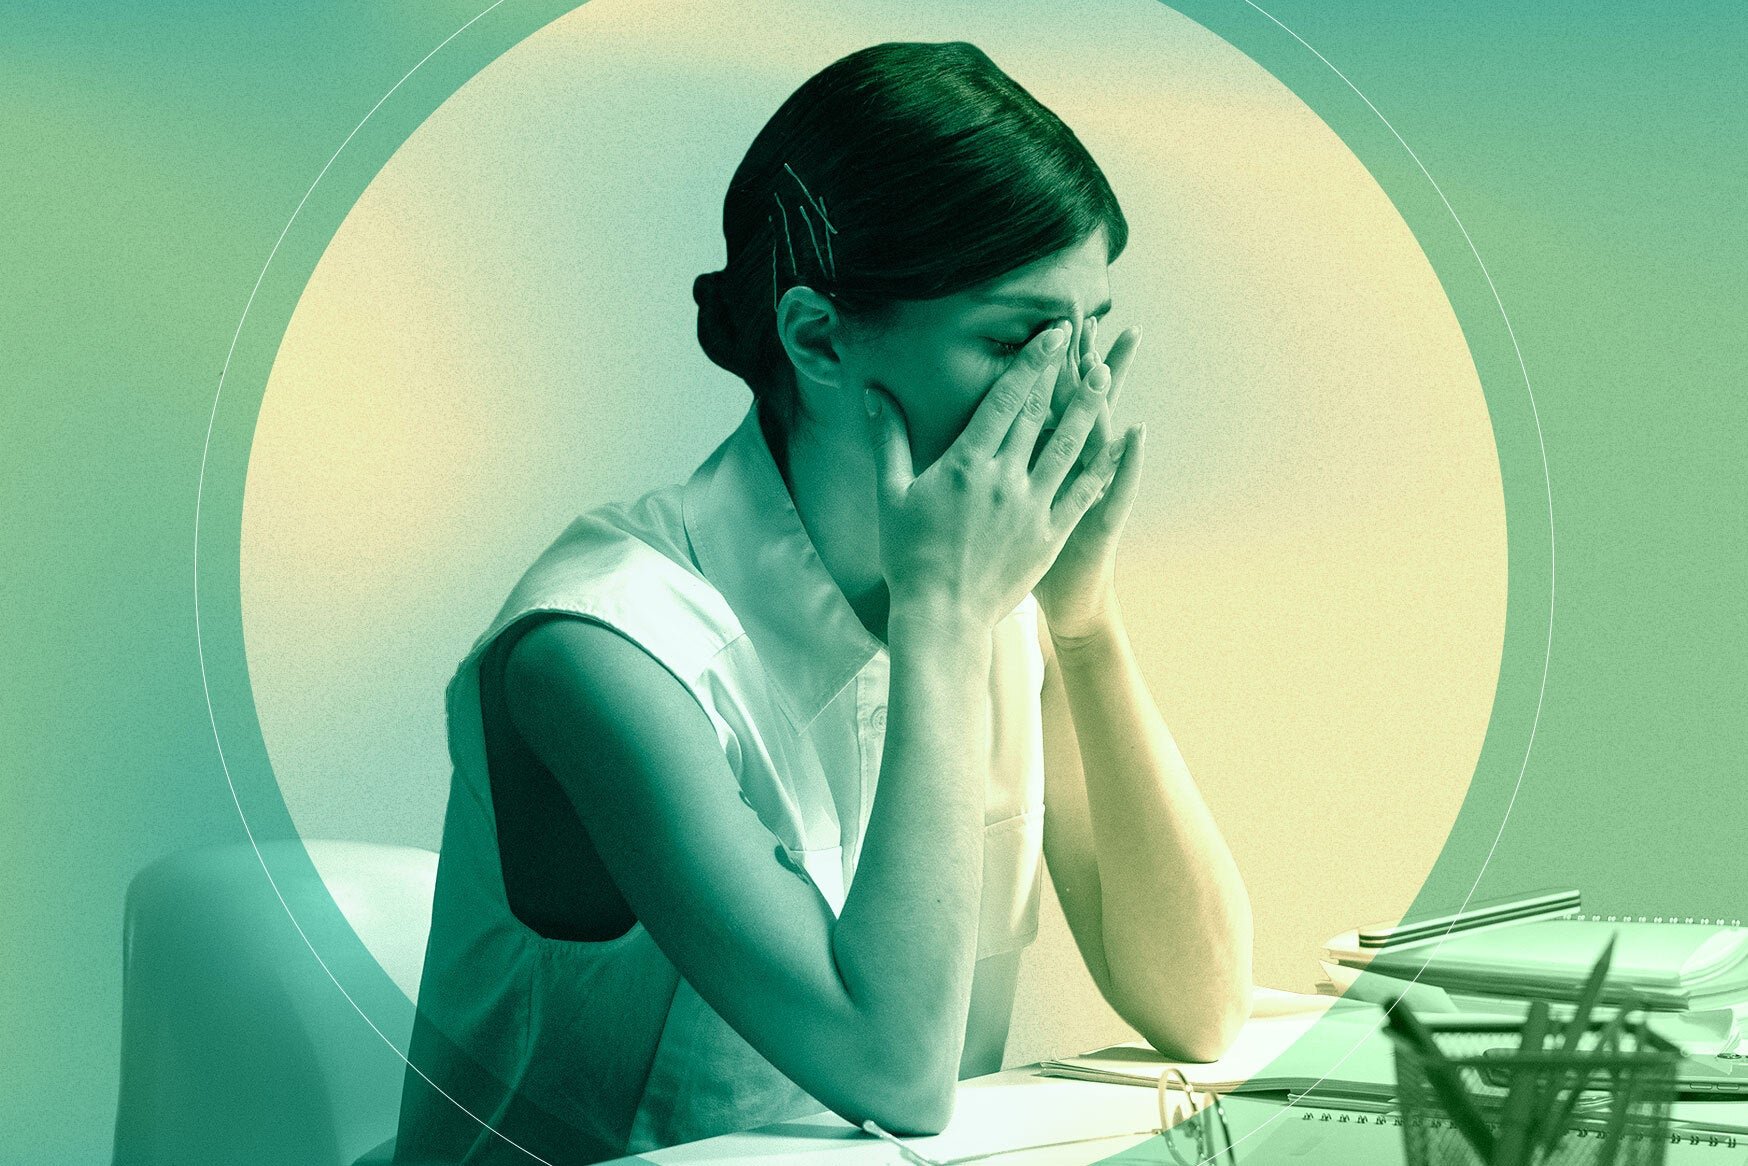 Burnout is real. Here's how to spot it—and recover.